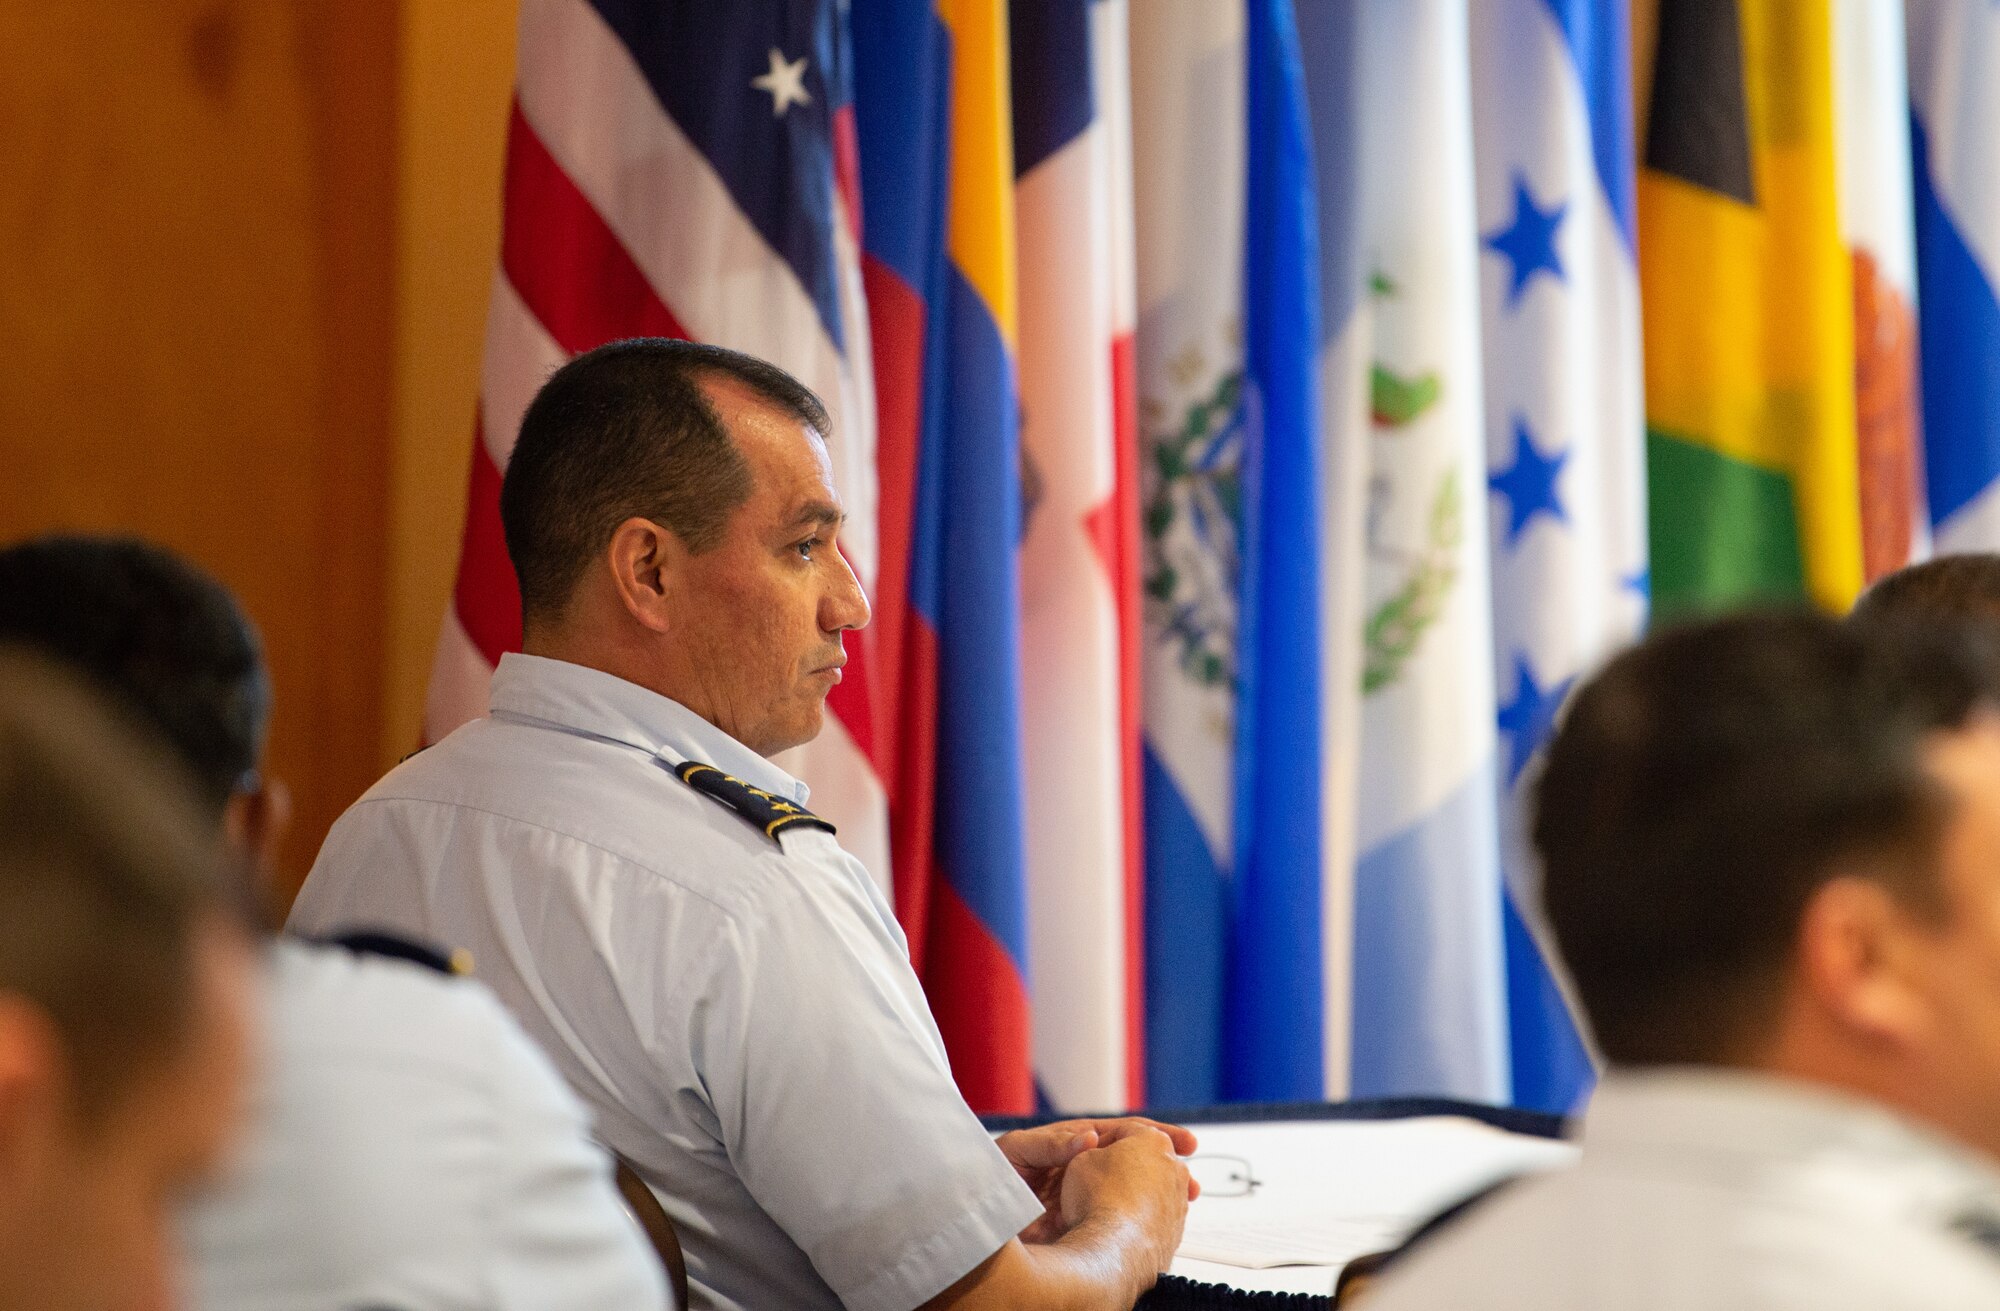 Colonel Salvador Hernández Vega, Salvadoran Air Force Commander, listens to a presentation during the Central American and Caribbean Air Chief’s conference at Davis-Monthan Air Force Base, Ariz., Nov. 6-8, 2018.